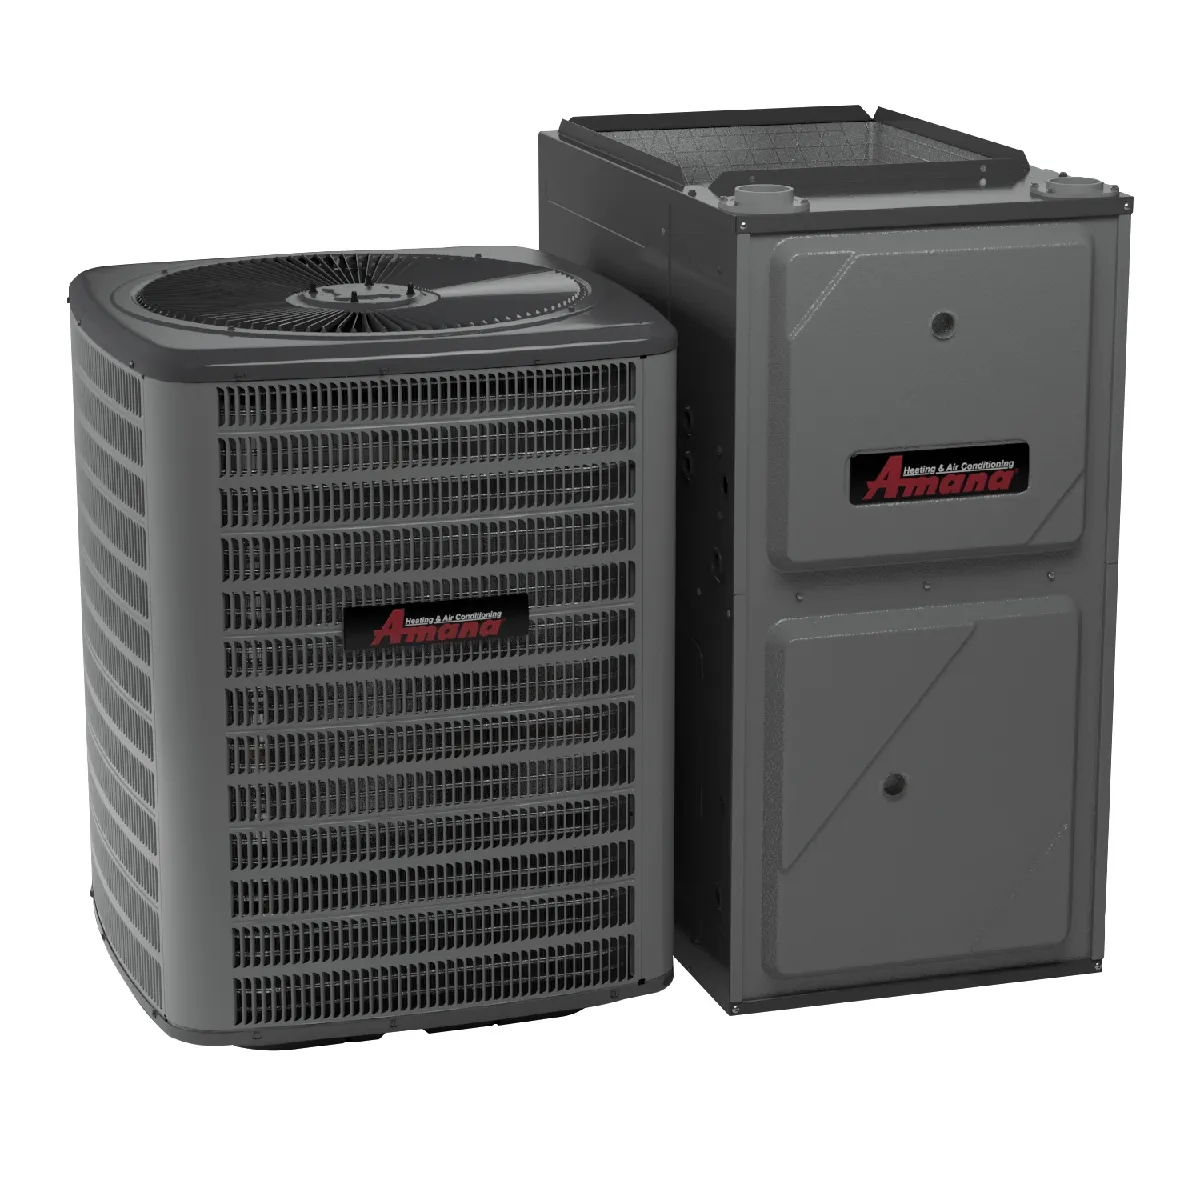 A Amana condensing unit and indoor air handling unit